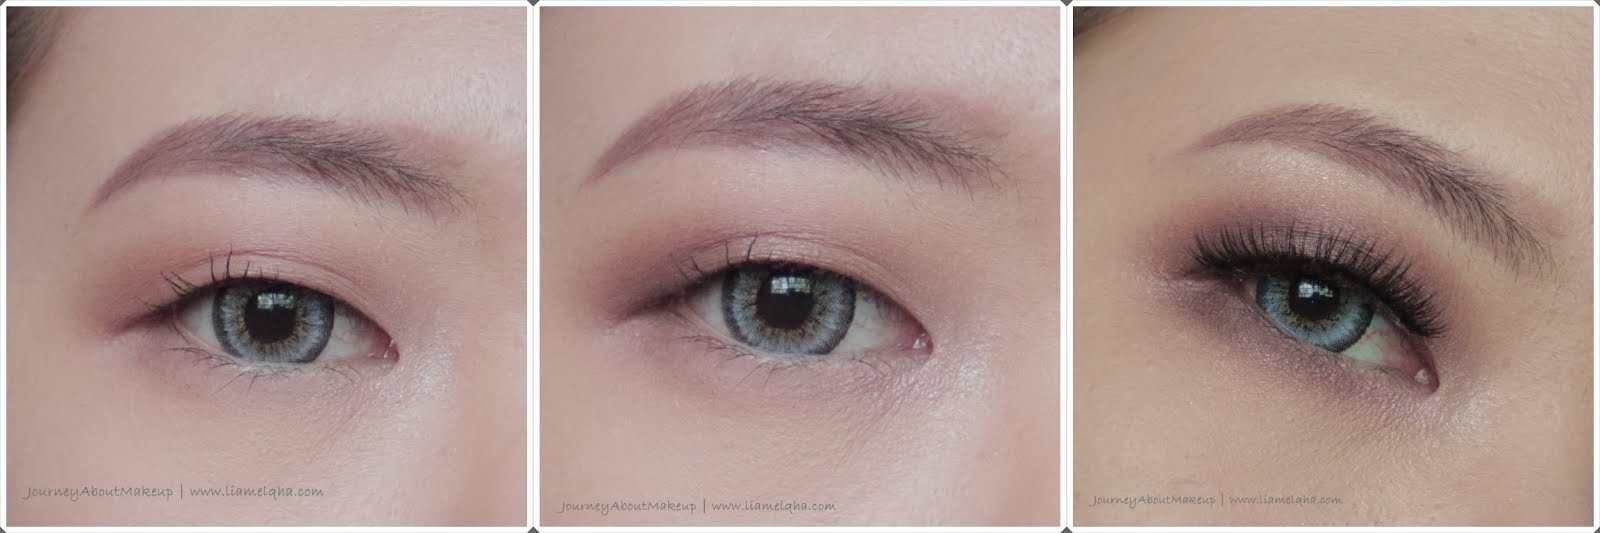 Review JustMiss Umbra Eyeshadow Palette Tanned Tease Liamelqha